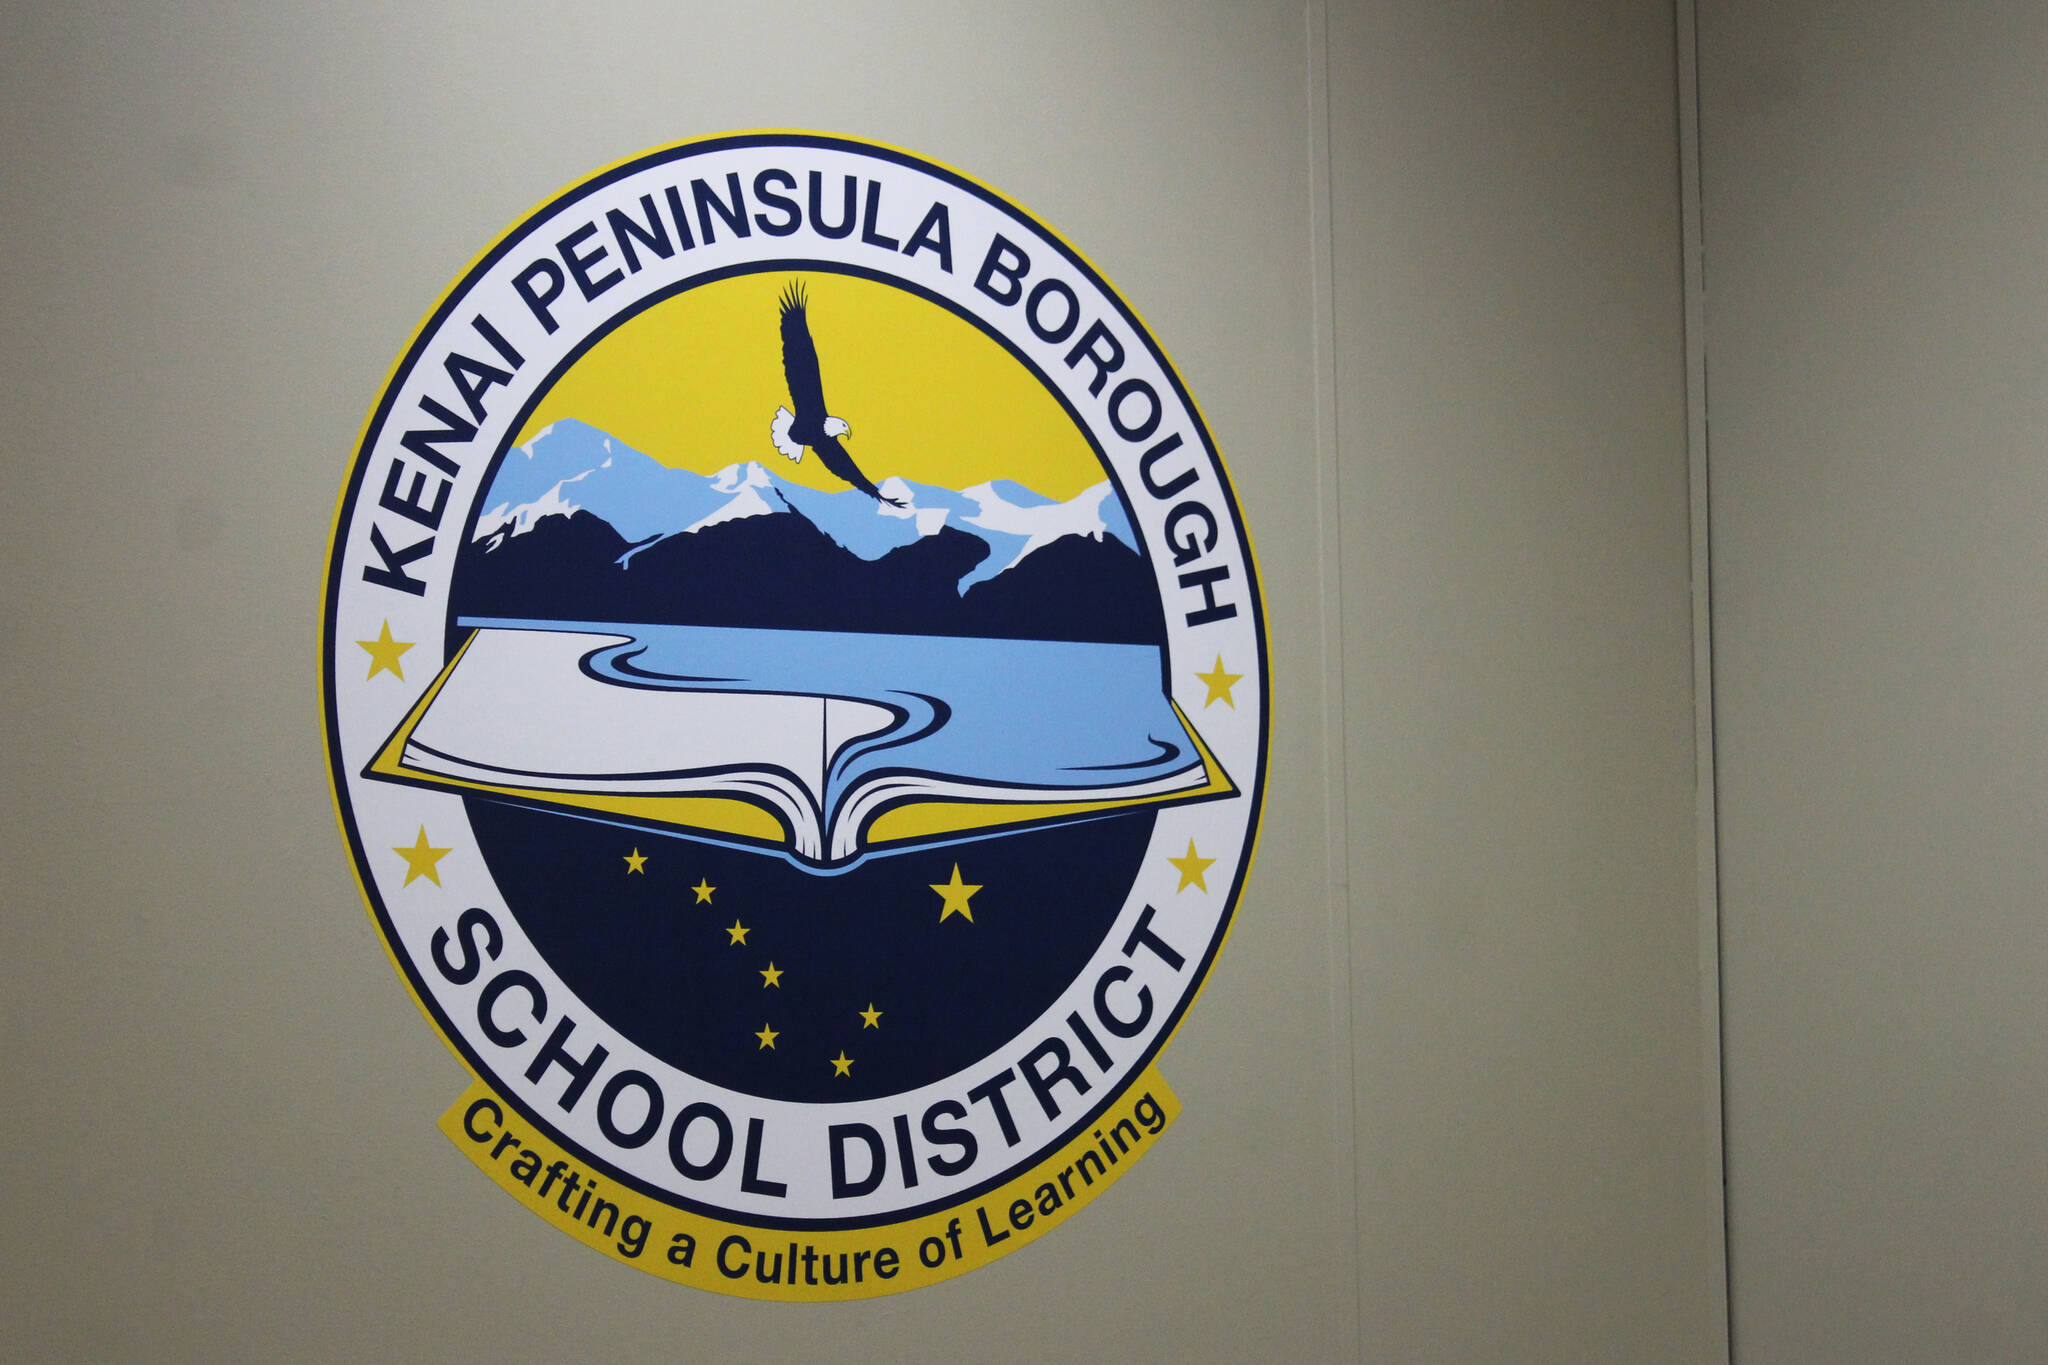 Ashlyn O’Hara/Peninsula Clarion 
The logo for the Kenai Peninsula Borough School District is displayed inside the George A. Navarre Borough Admin Building on Thursday, July 22 in Soldotna.